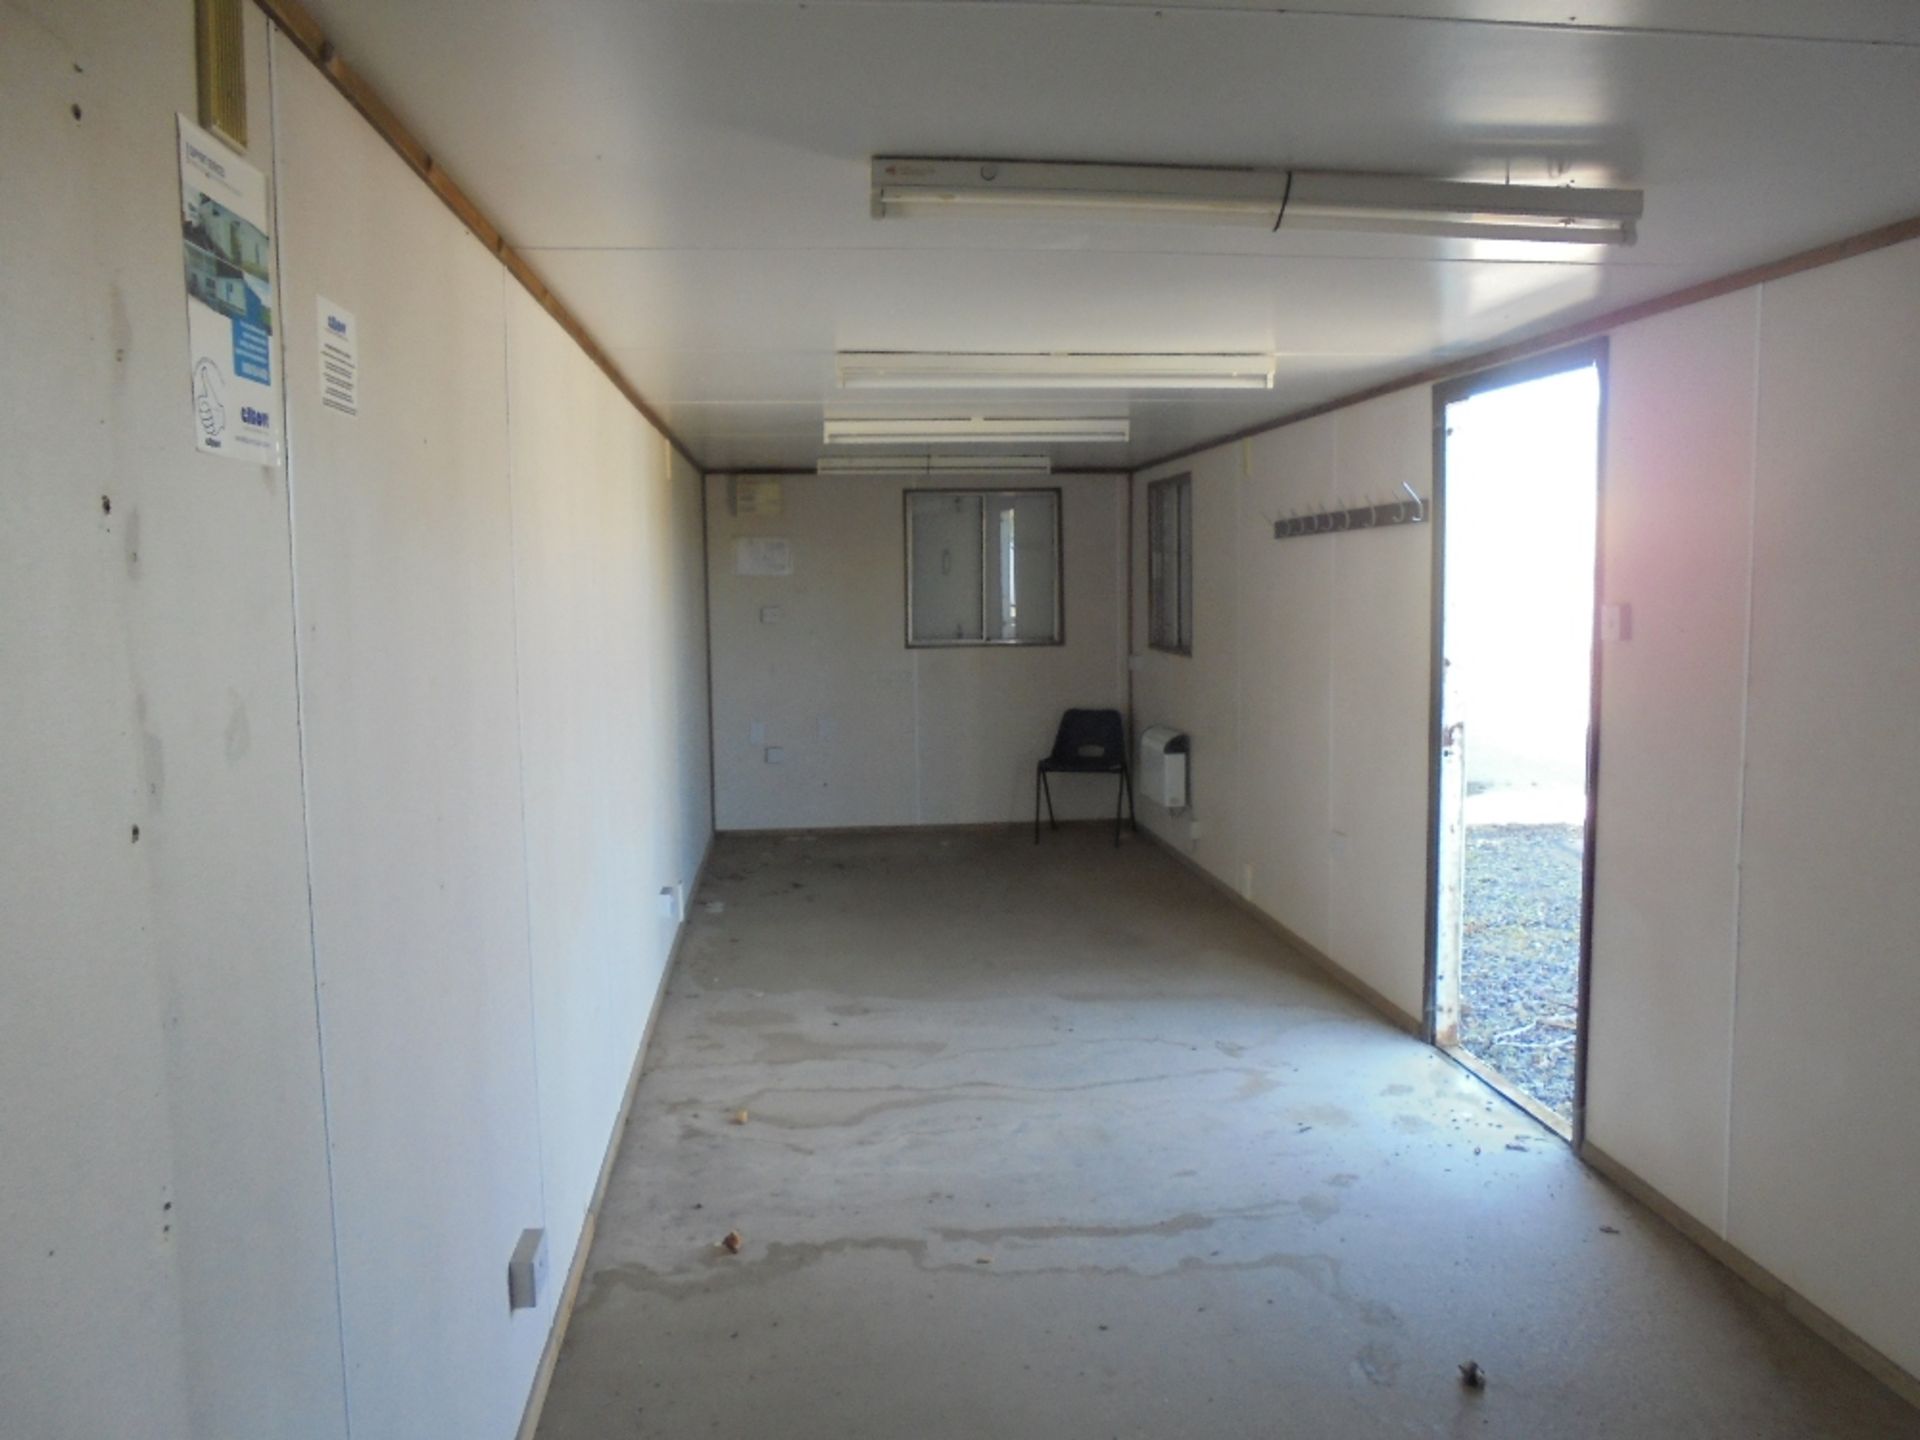 WSO865 32ft x 9ft Anti Vandal Office - Image 4 of 6